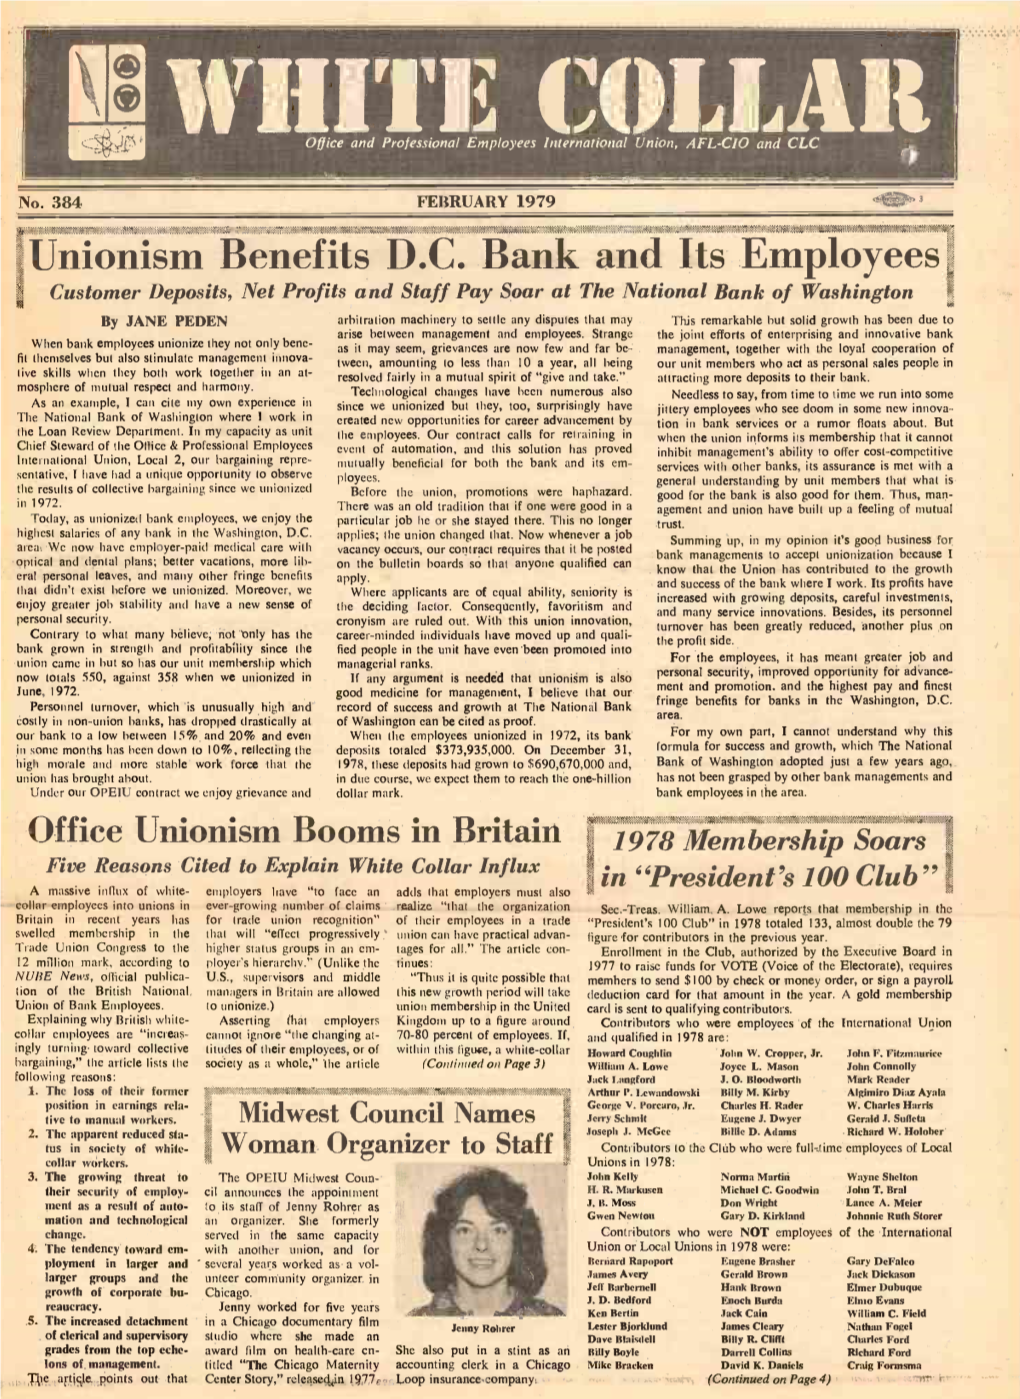 Nionism Benefits D.C. Bank and Its Employees